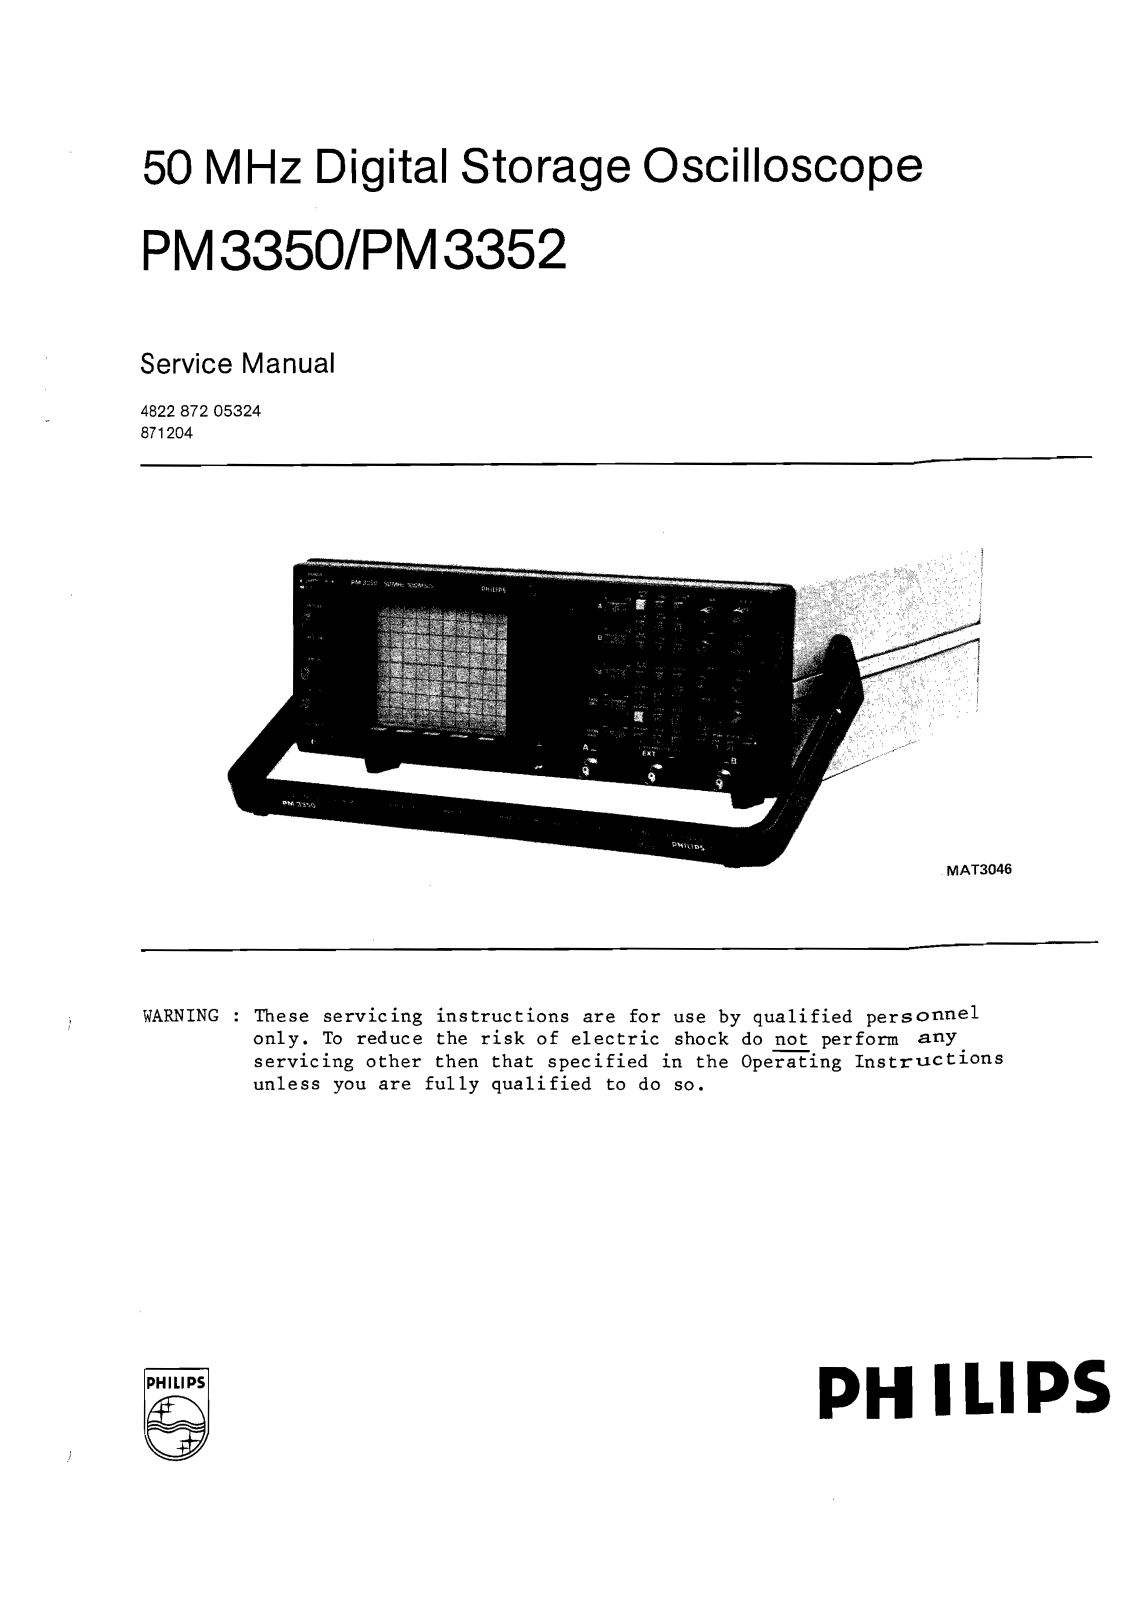 Philips PM-3350 Service Manual